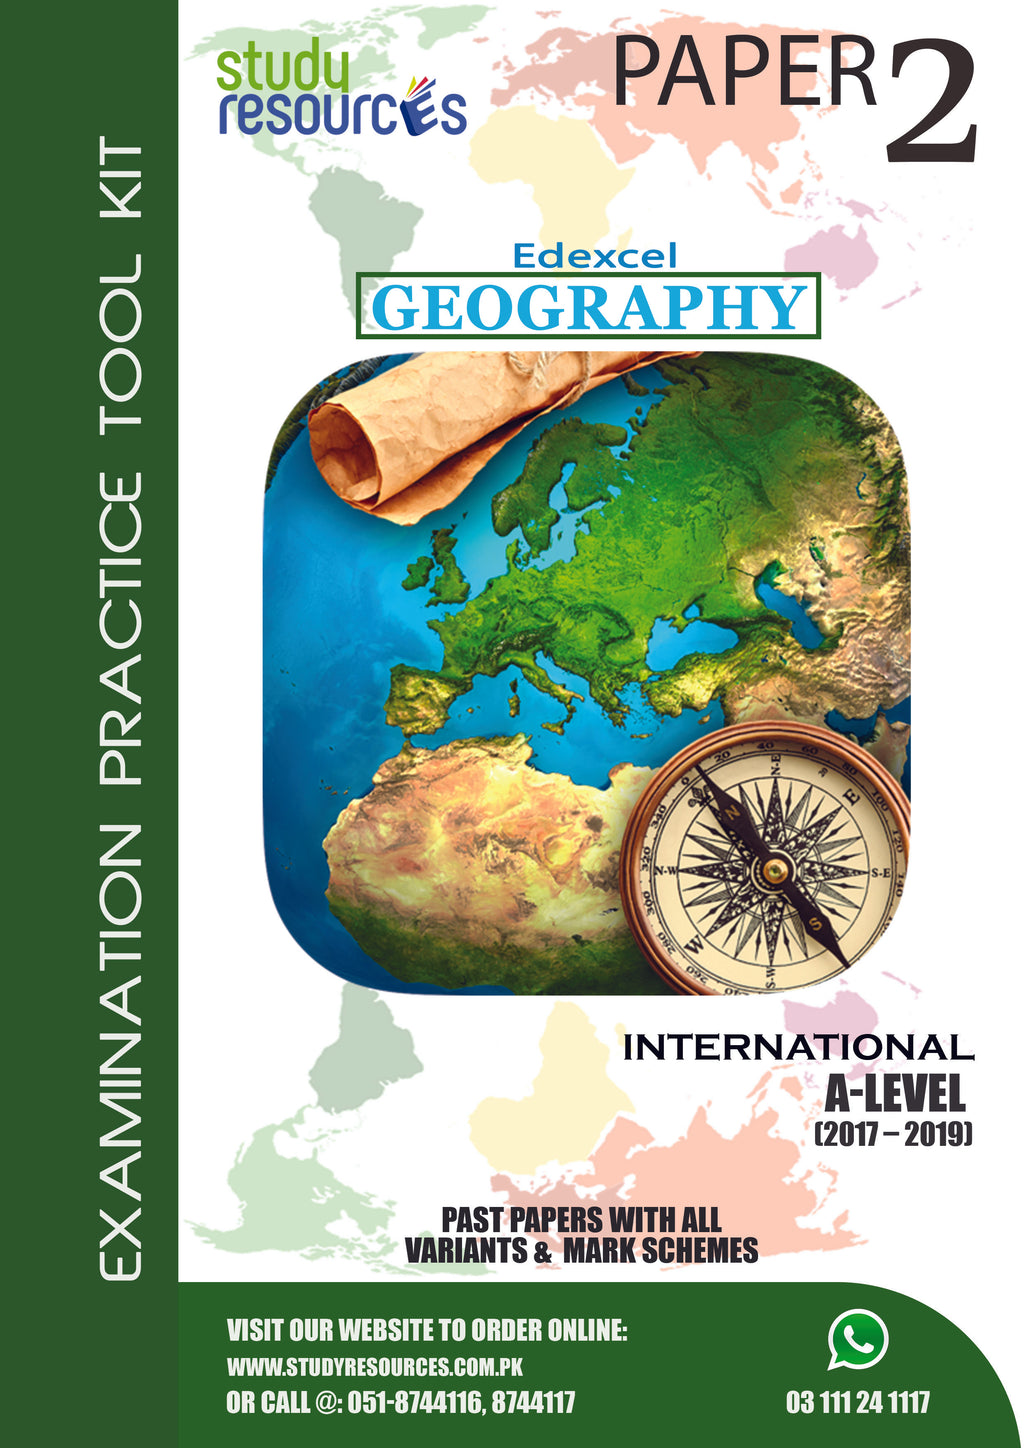 Edexcel A-Level Geography P-2 Past Papers (2017-2019)